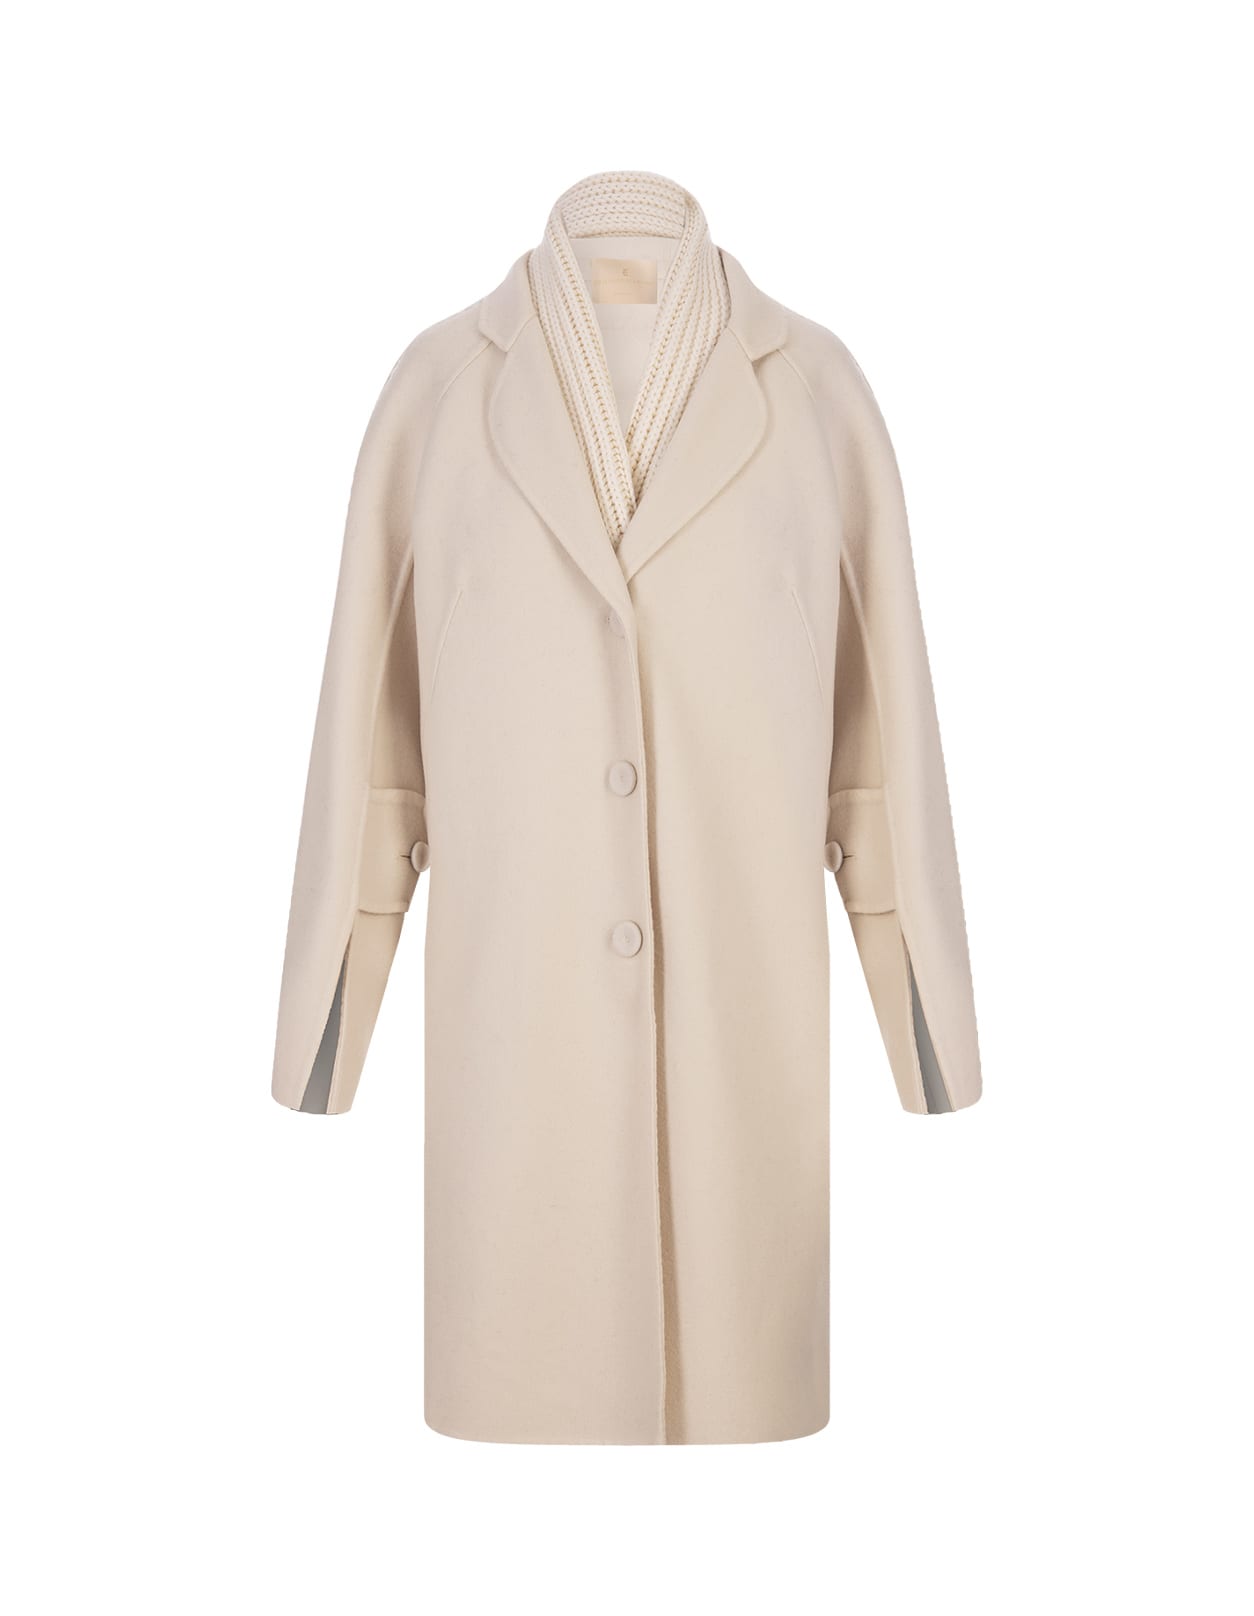 White Wool Coat With Gilet